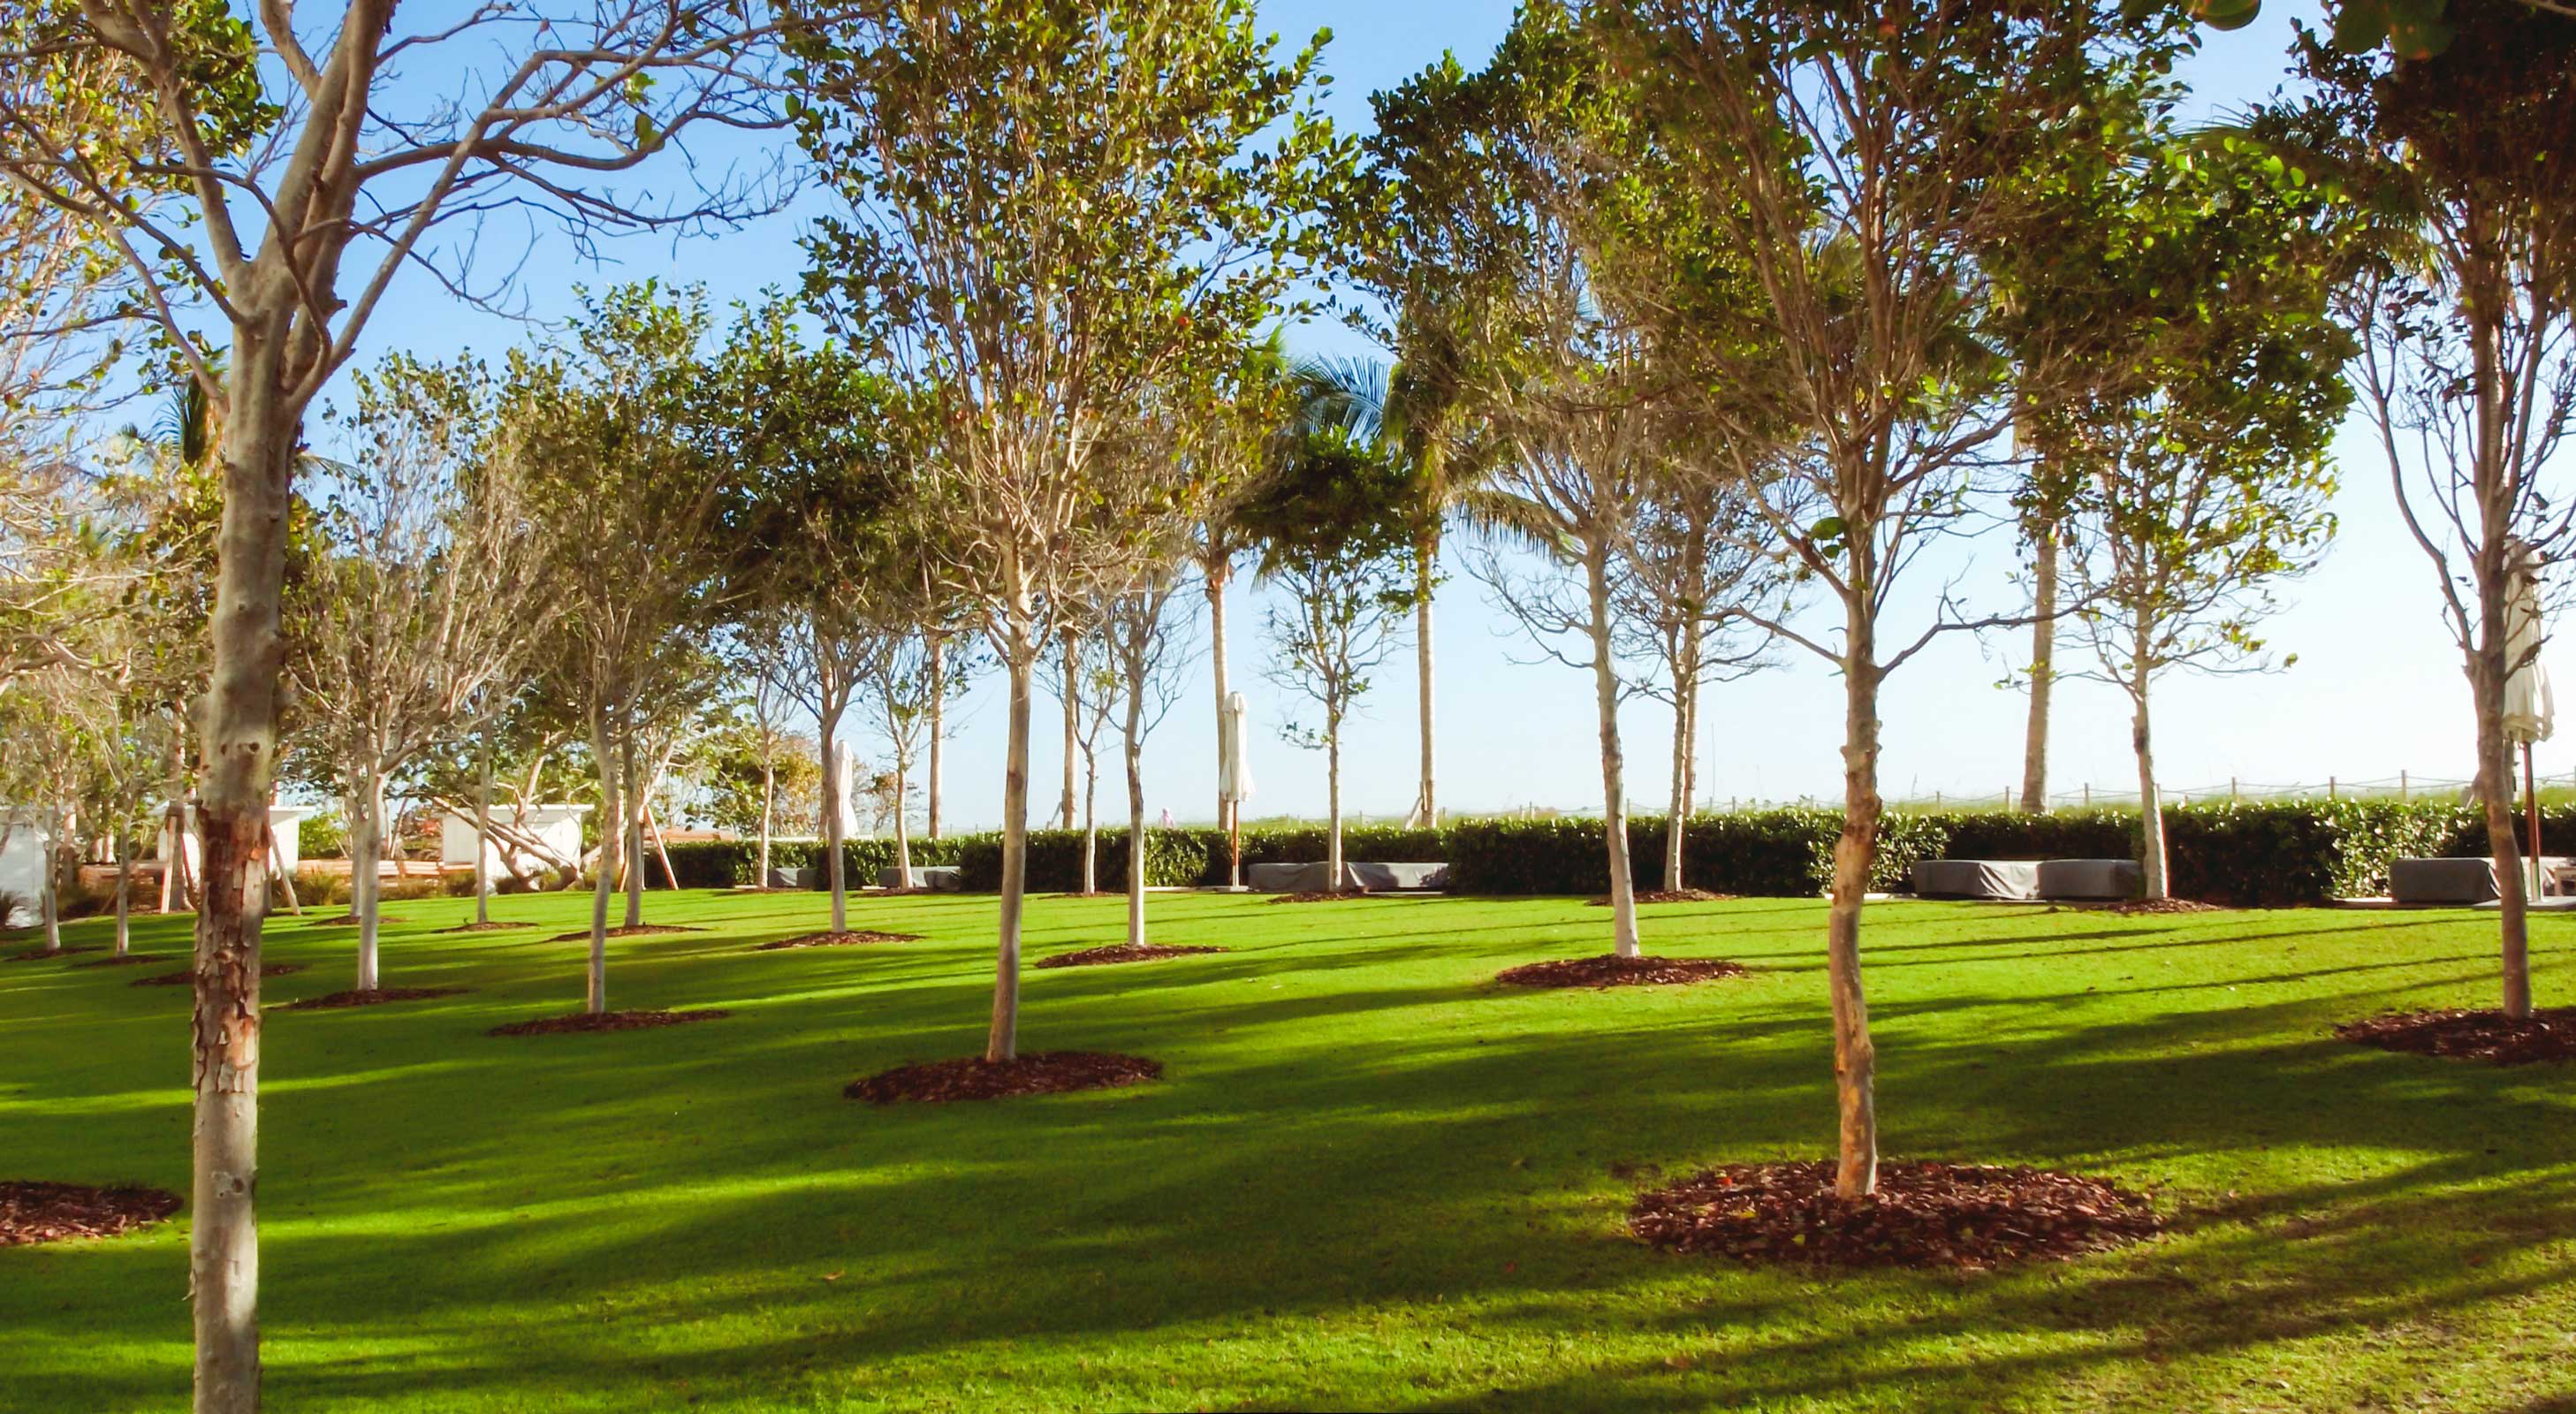 A view of The Surf Club Four Seasons tree-lined garden.